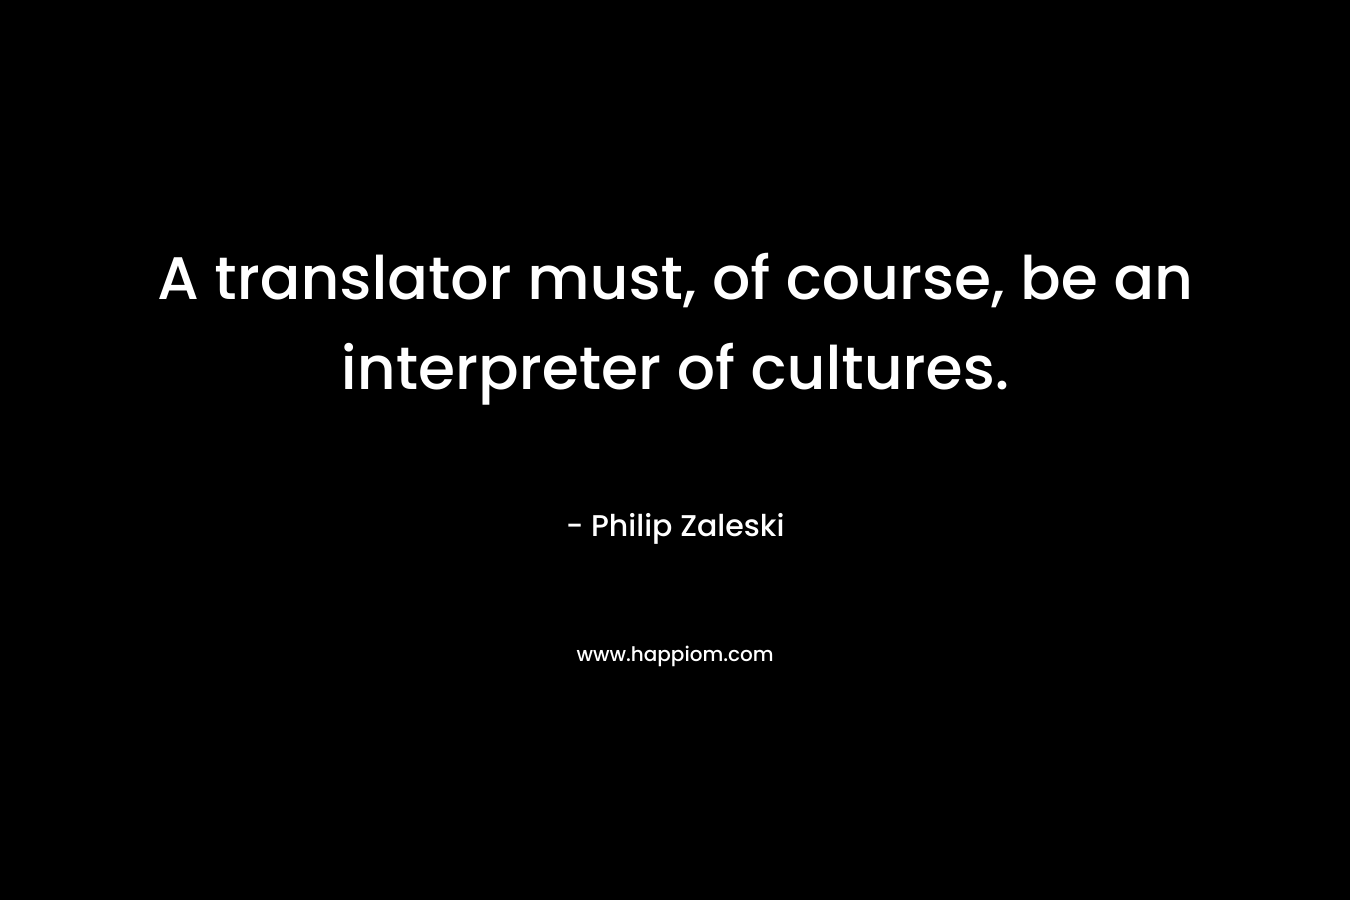 A translator must, of course, be an interpreter of cultures.